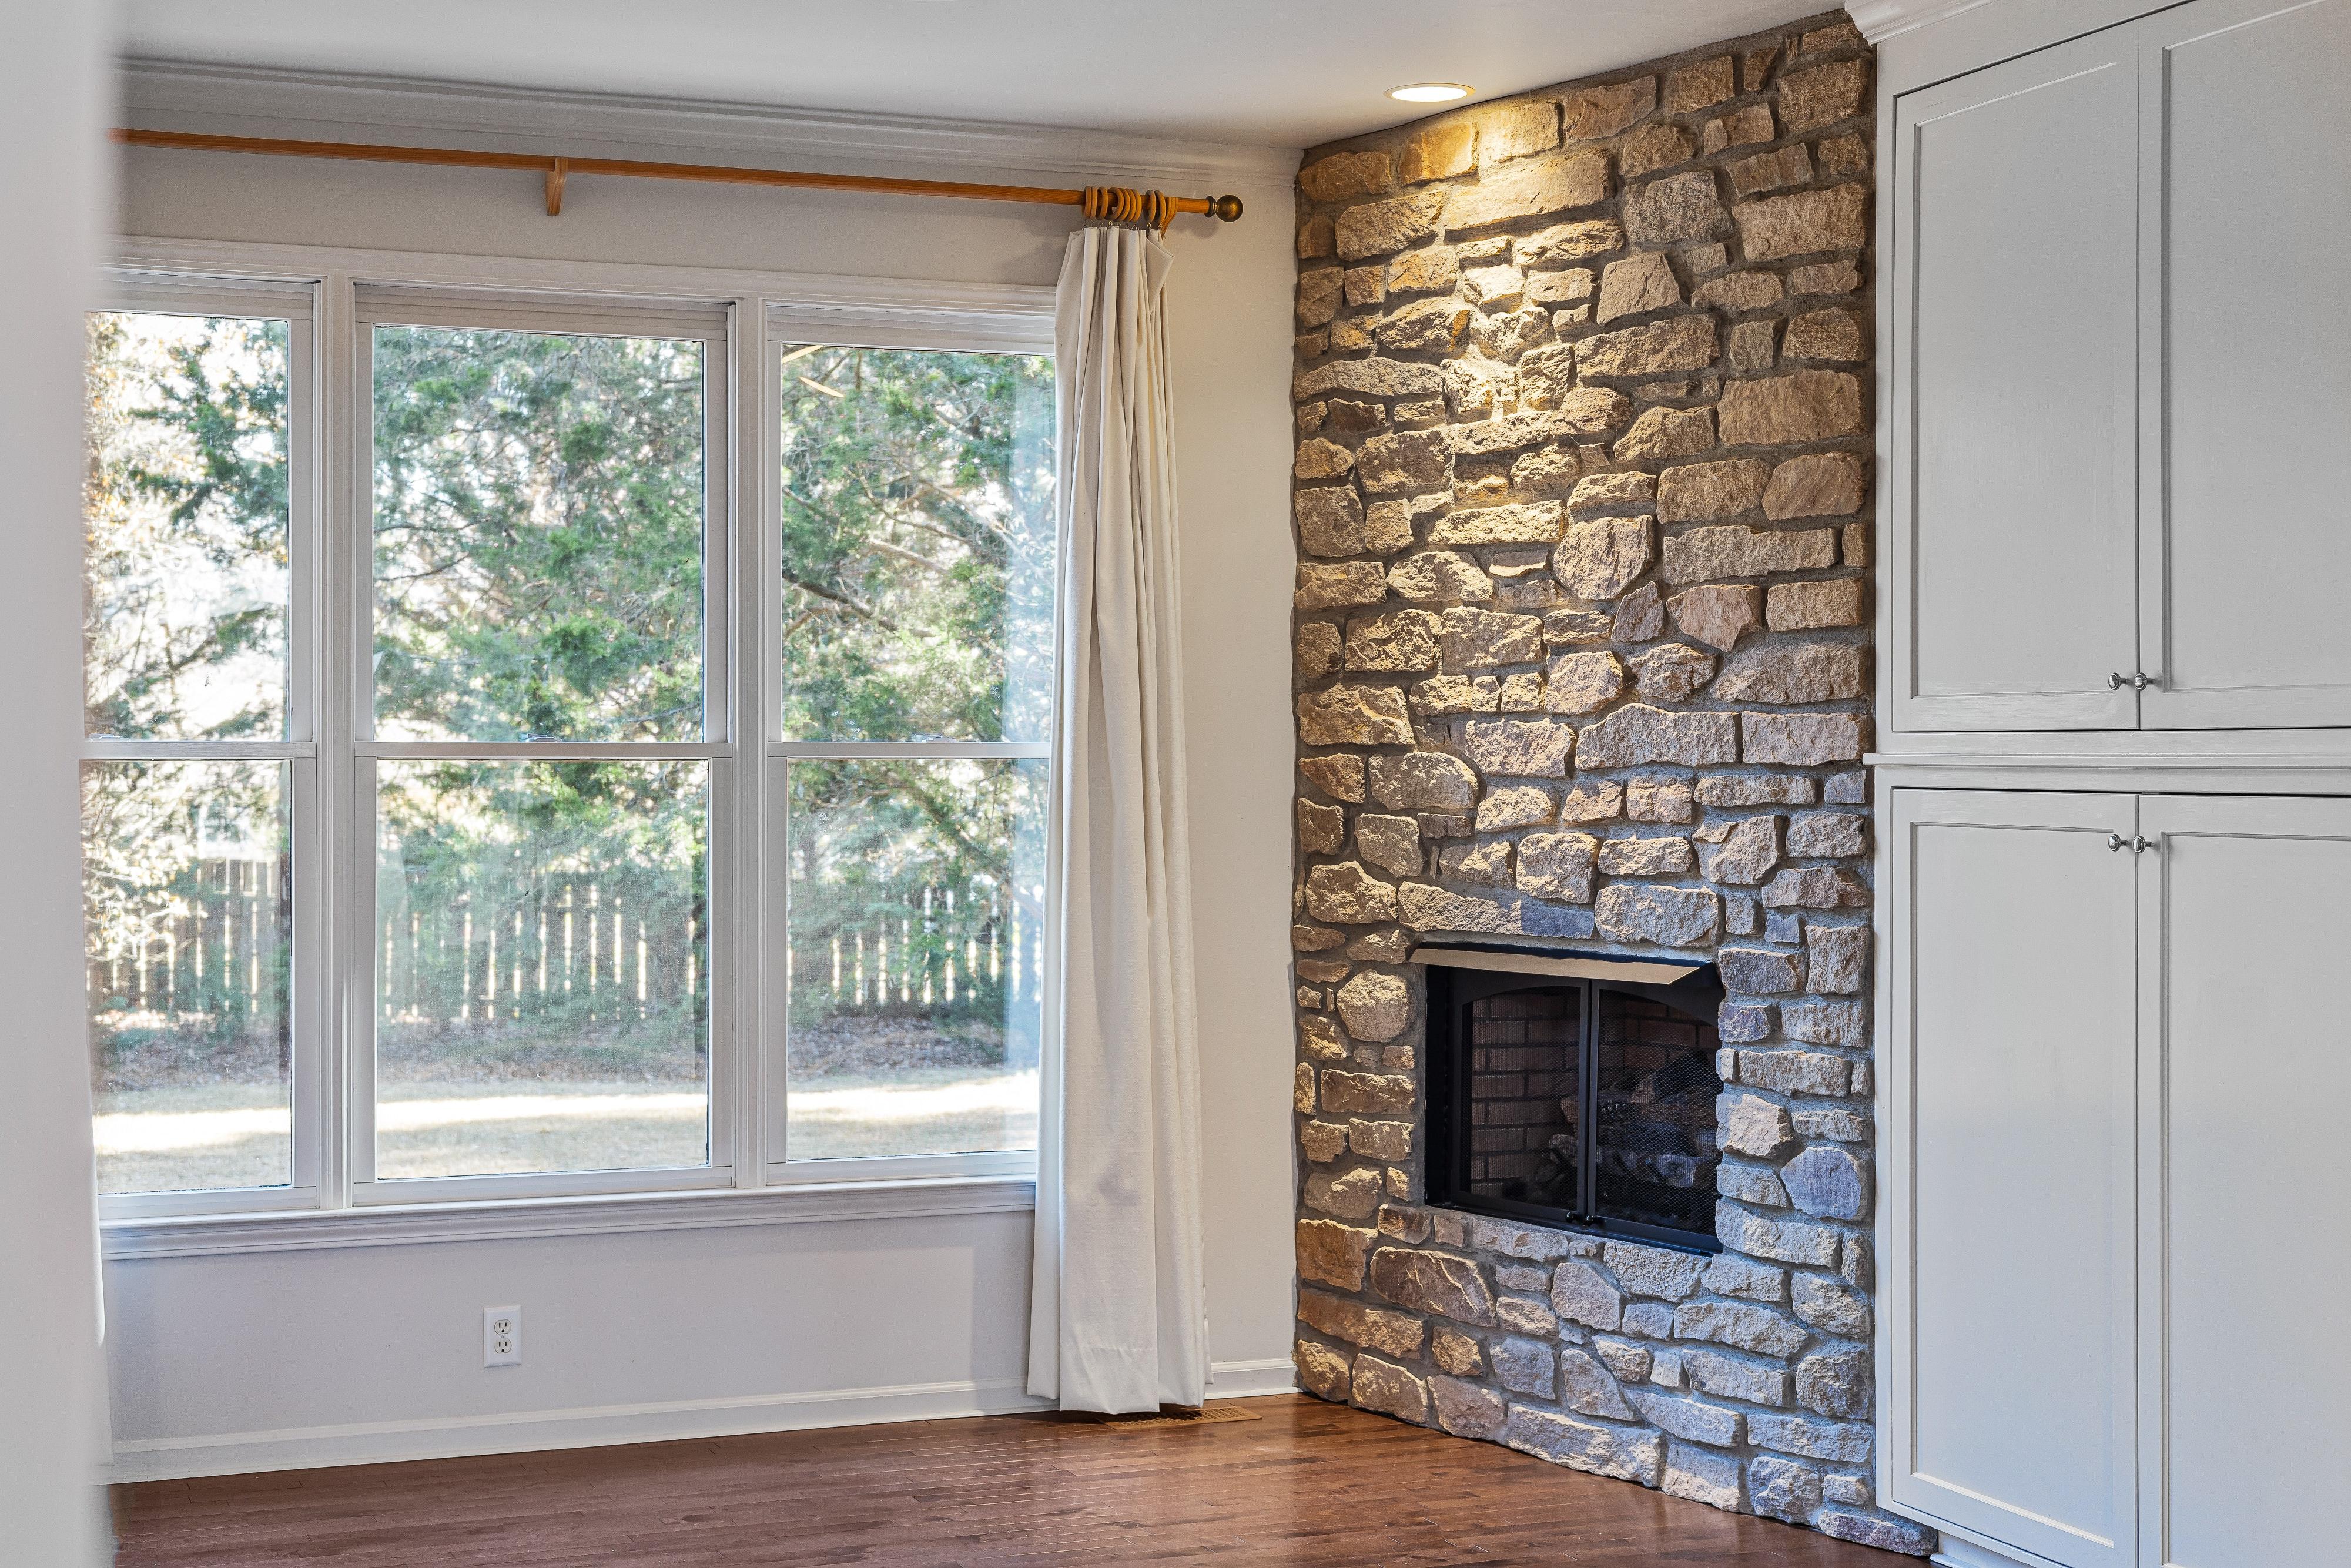  How To Fill Gap Between Fireplace And Wall 